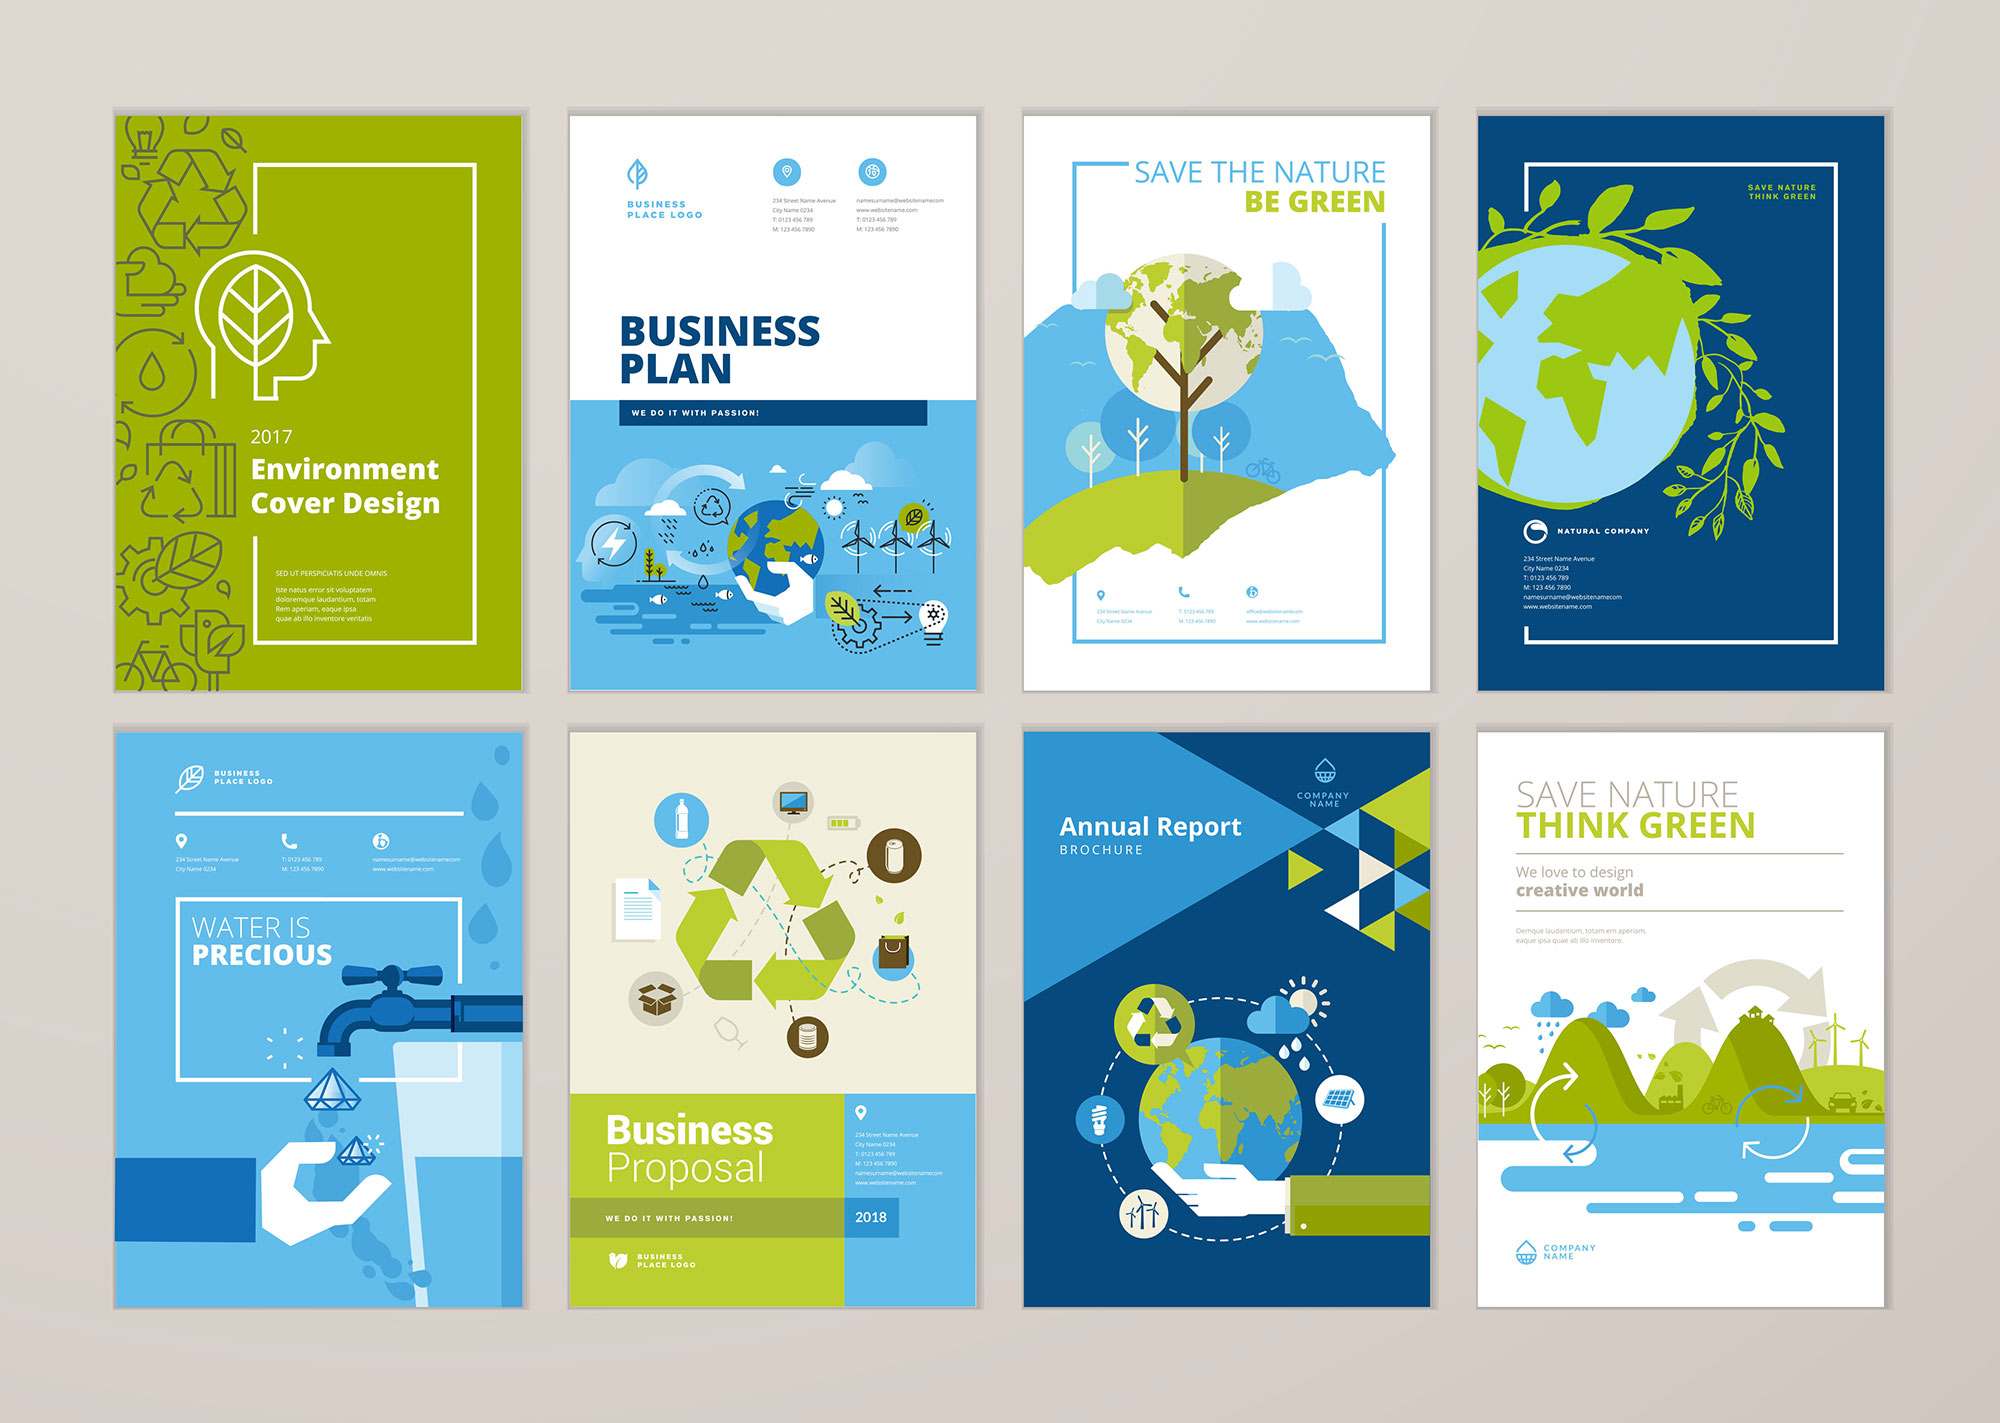 Set of brochure and annual report cover design templates of nature, green technology, renewable energy, sustainable development, environment stock illustration.